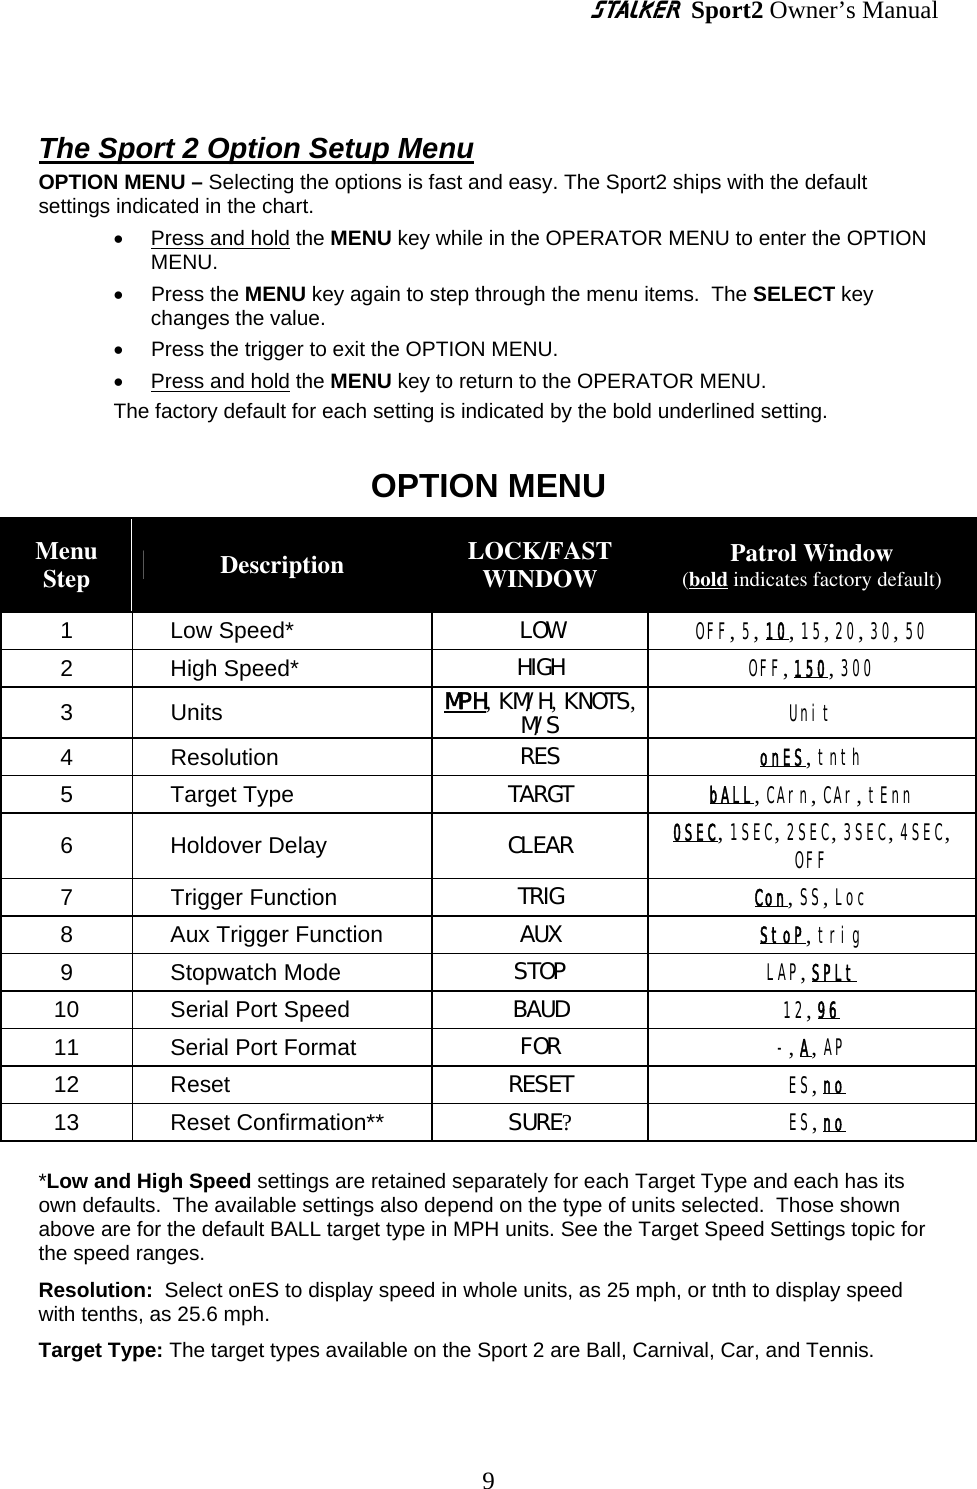 S Sport2 Owner’s Manual  The Sport 2 Option Setup Menu OPTION MENU – Selecting the options is fast and easy. The Sport2 ships with the default settings indicated in the chart. • Press and hold the MENU key while in the OPERATOR MENU to enter the OPTION MENU.   • Press the MENU key again to step through the menu items.  The SELECT key changes the value.   •  Press the trigger to exit the OPTION MENU.   • Press and hold the MENU key to return to the OPERATOR MENU.   The factory default for each setting is indicated by the bold underlined setting.  OPTION MENU Menu Step  Description  LOCK/FAST WINDOW  Patrol Window (bold indicates factory default) 1 Low Speed*  LOW  OFF, 5, 10, 15, 20, 30, 50   2 High Speed*  HIGH  OFF, 150, 300 3 Units  MPH, KM/ H, KNOTS, M/ S  Unit 4 Resolution  RES  onES, tnth 5 Target Type  TARGT  bALL, CArn, CAr, tEnn 6 Holdover Delay  CLEAR  0SEC, 1SEC, 2SEC, 3SEC, 4SEC, OFF 7 Trigger Function  TRIG  Con, SS, Loc 8  Aux Trigger Function  AUX  StoP, trig 9 Stopwatch Mode  STOP  LAP, SPLt 10  Serial Port Speed  BAUD  12, 96 11  Serial Port Format  FOR  -, A, AP 12 Reset  RESET  ES, no 13 Reset Confirmation**  SURE?  ES, no      *Low and High Speed settings are retained separately for each Target Type and each has its own defaults.  The available settings also depend on the type of units selected.  Those shown above are for the default BALL target type in MPH units. See the Target Speed Settings topic for the speed ranges. Resolution:  Select onES to display speed in whole units, as 25 mph, or tnth to display speed with tenths, as 25.6 mph. Target Type: The target types available on the Sport 2 are Ball, Carnival, Car, and Tennis. 9 